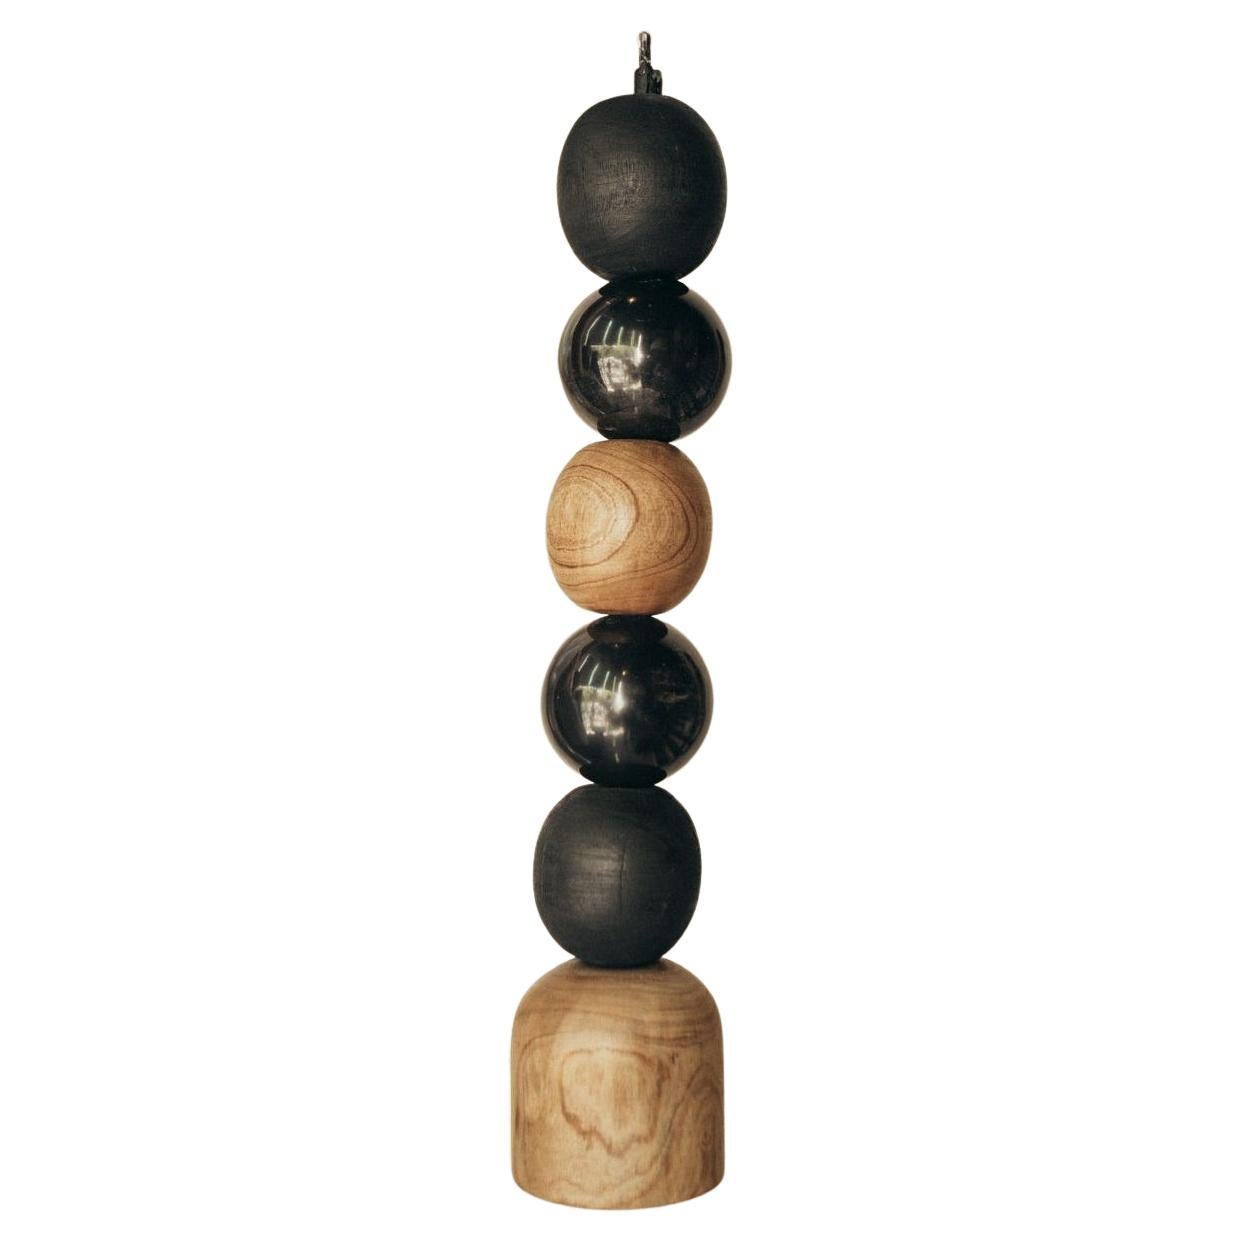 Pendant Lamp of Wooden, Burned, Natural and Black Marble Balls by Daniel Orozco